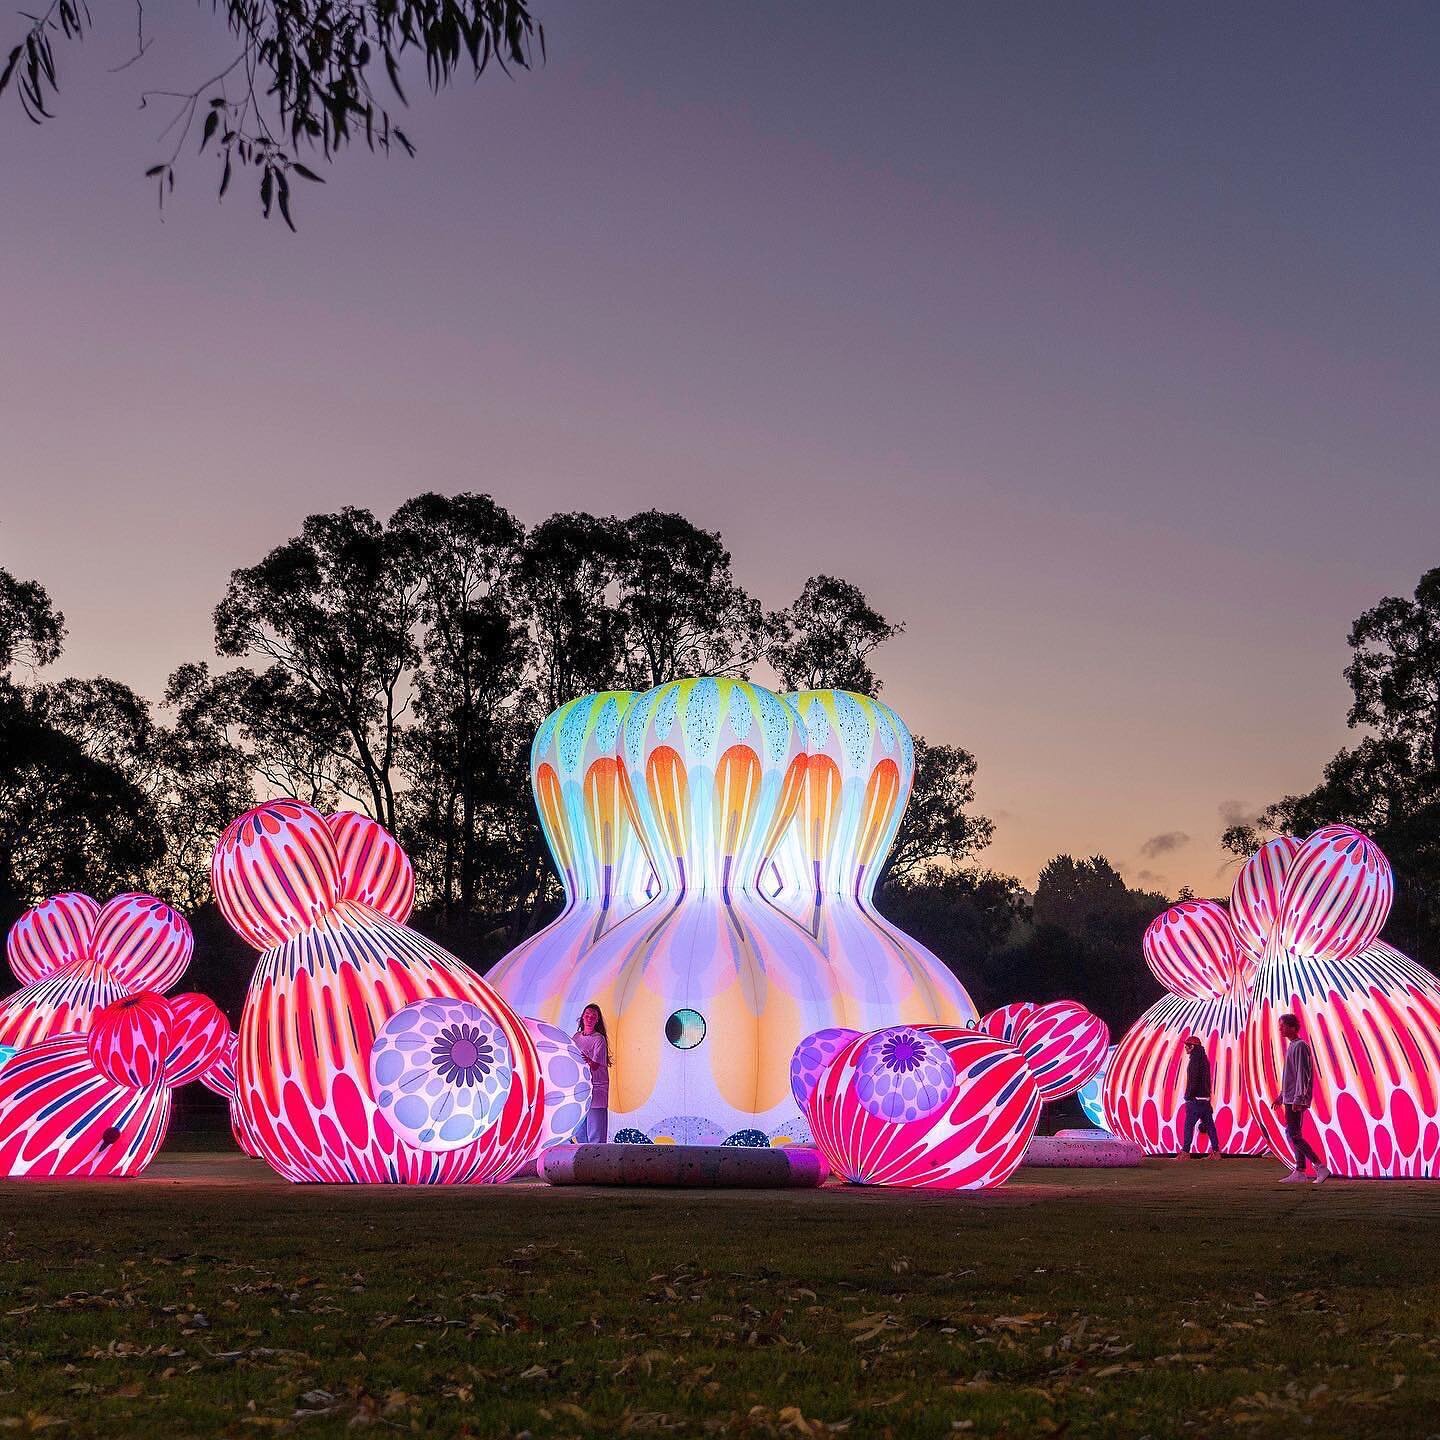 Cupid's Koi Garden, the world's first interactive, inflatable fountain has arrived as part of the @adelaidefestival !

At Keith Stepheneson's Park in Mt Barker, Cupid and his Koi are framed by a lush Australian treescape with wide open greenspace to 